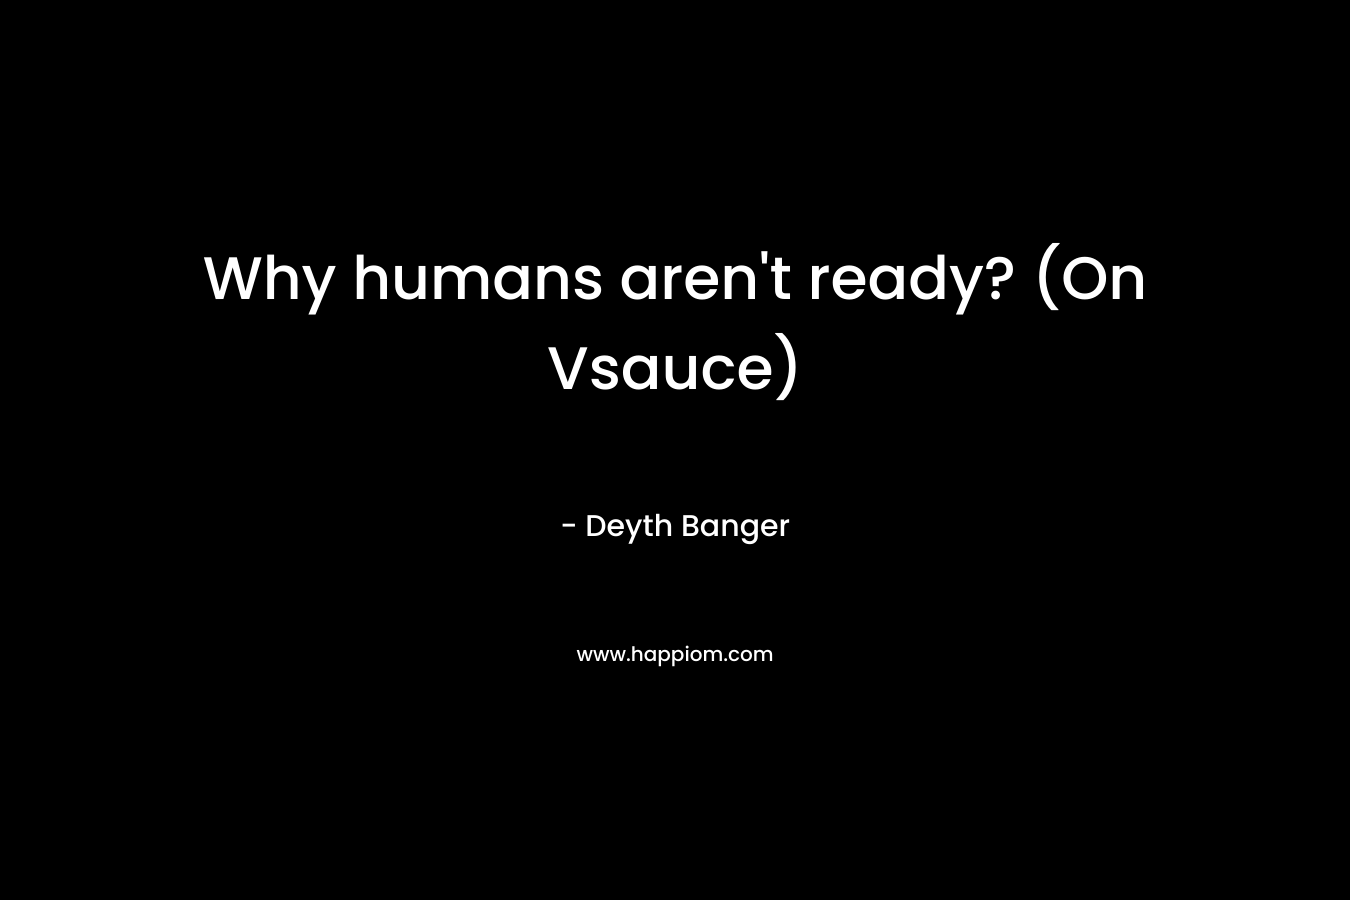 Why humans aren't ready? (On Vsauce)